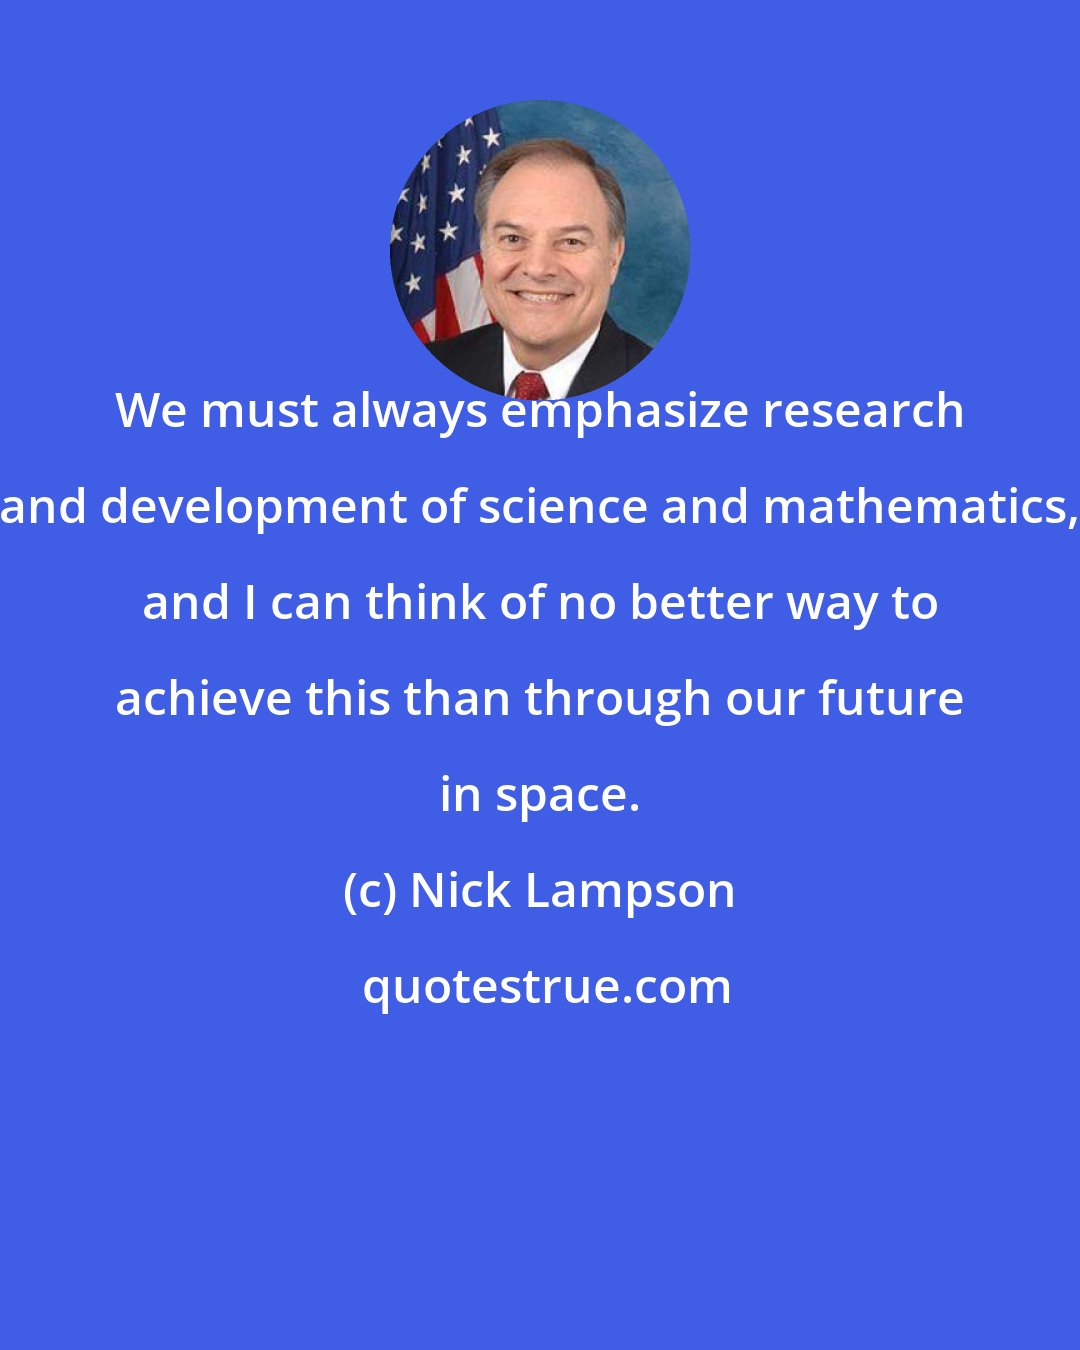 Nick Lampson: We must always emphasize research and development of science and mathematics, and I can think of no better way to achieve this than through our future in space.